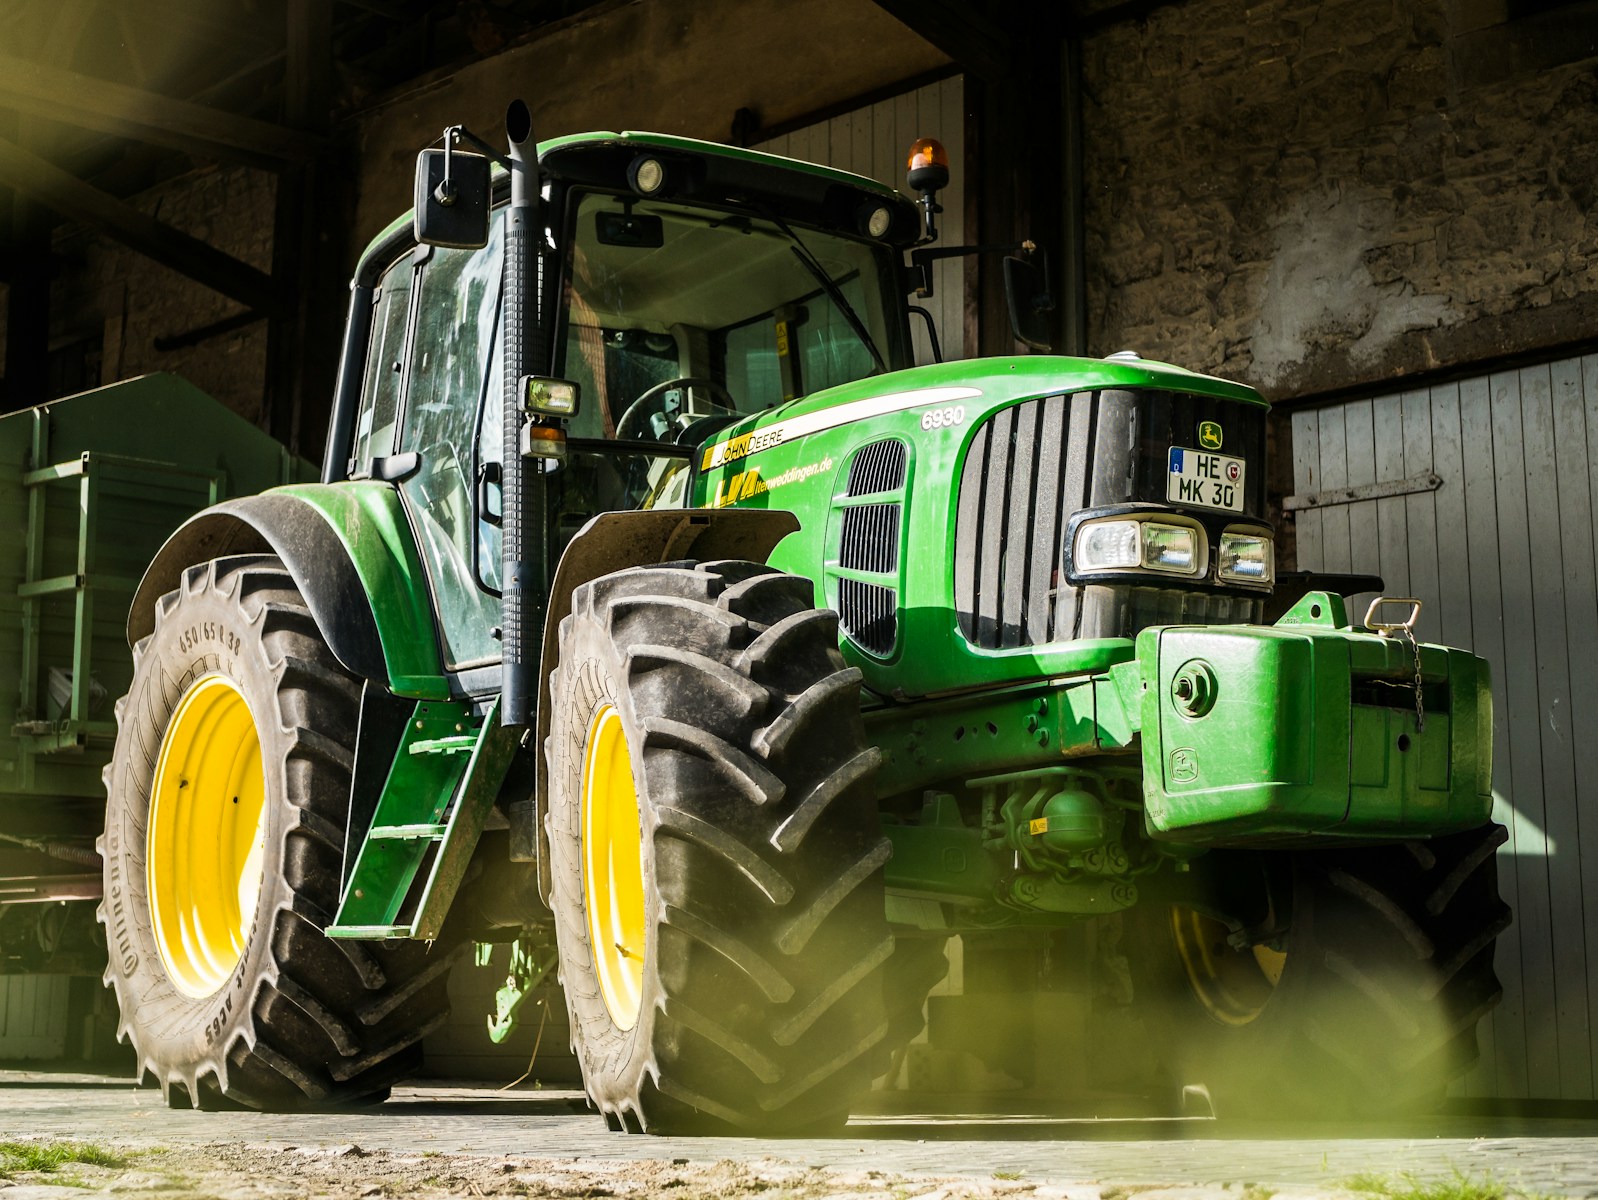 green and yellow tractor with farm equipment coverage in garage